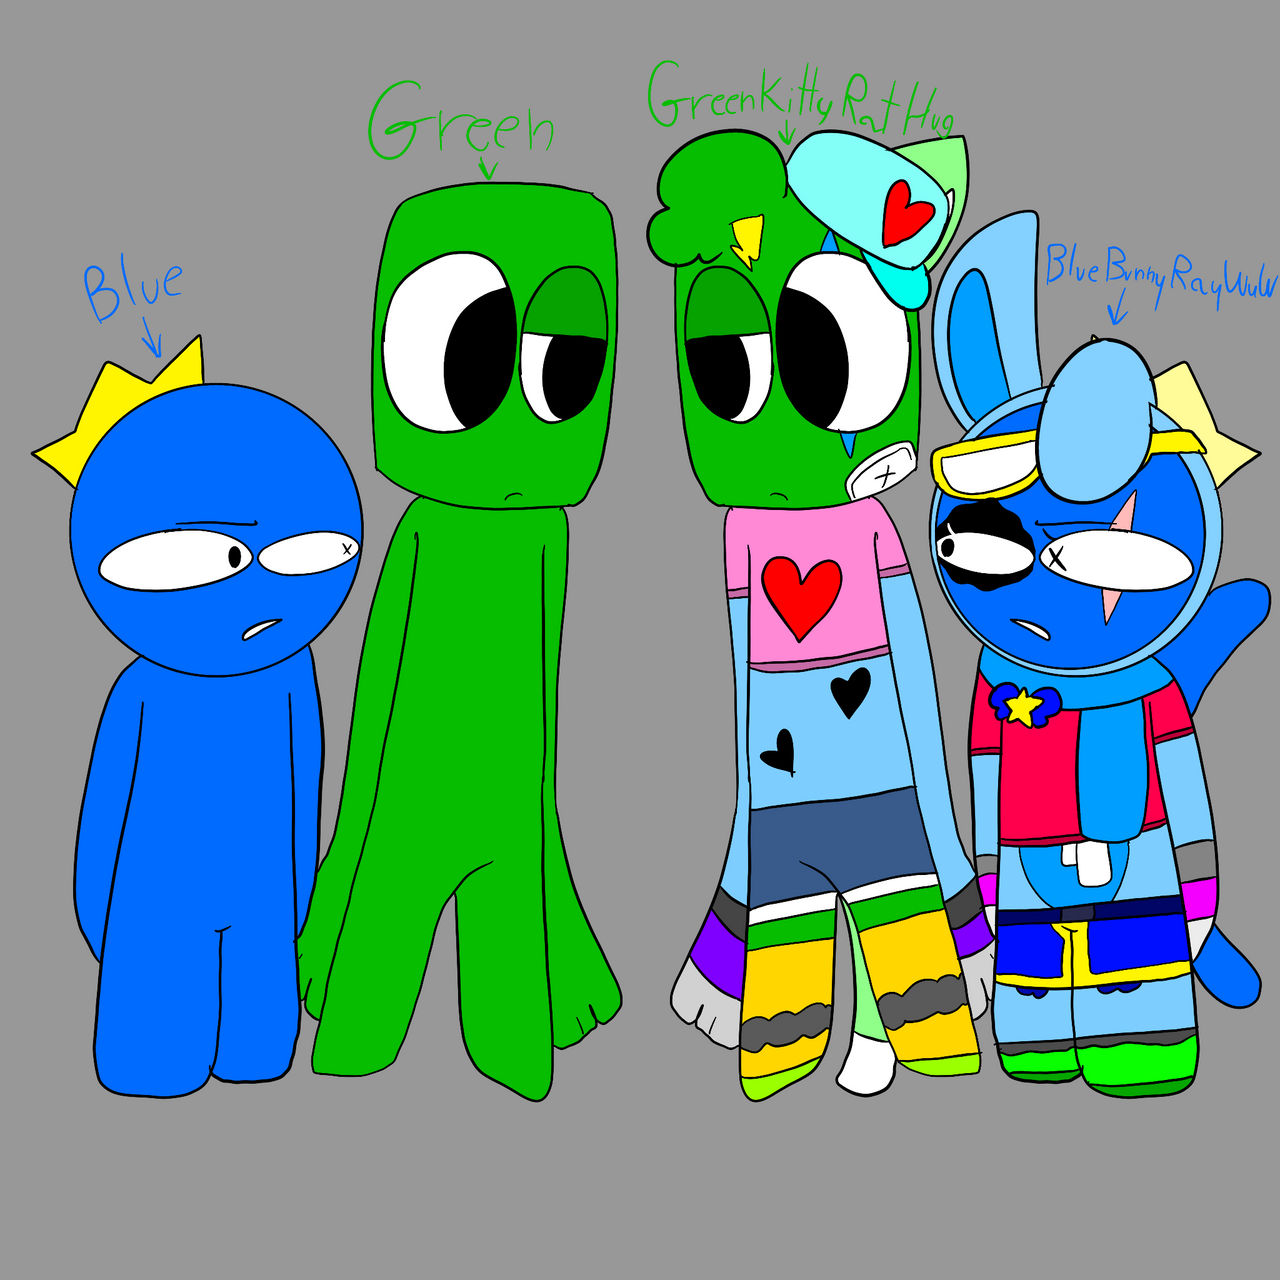 Blue x Green Rainbow Friends FRIENDS GOOGLE THEMSELVES two parts